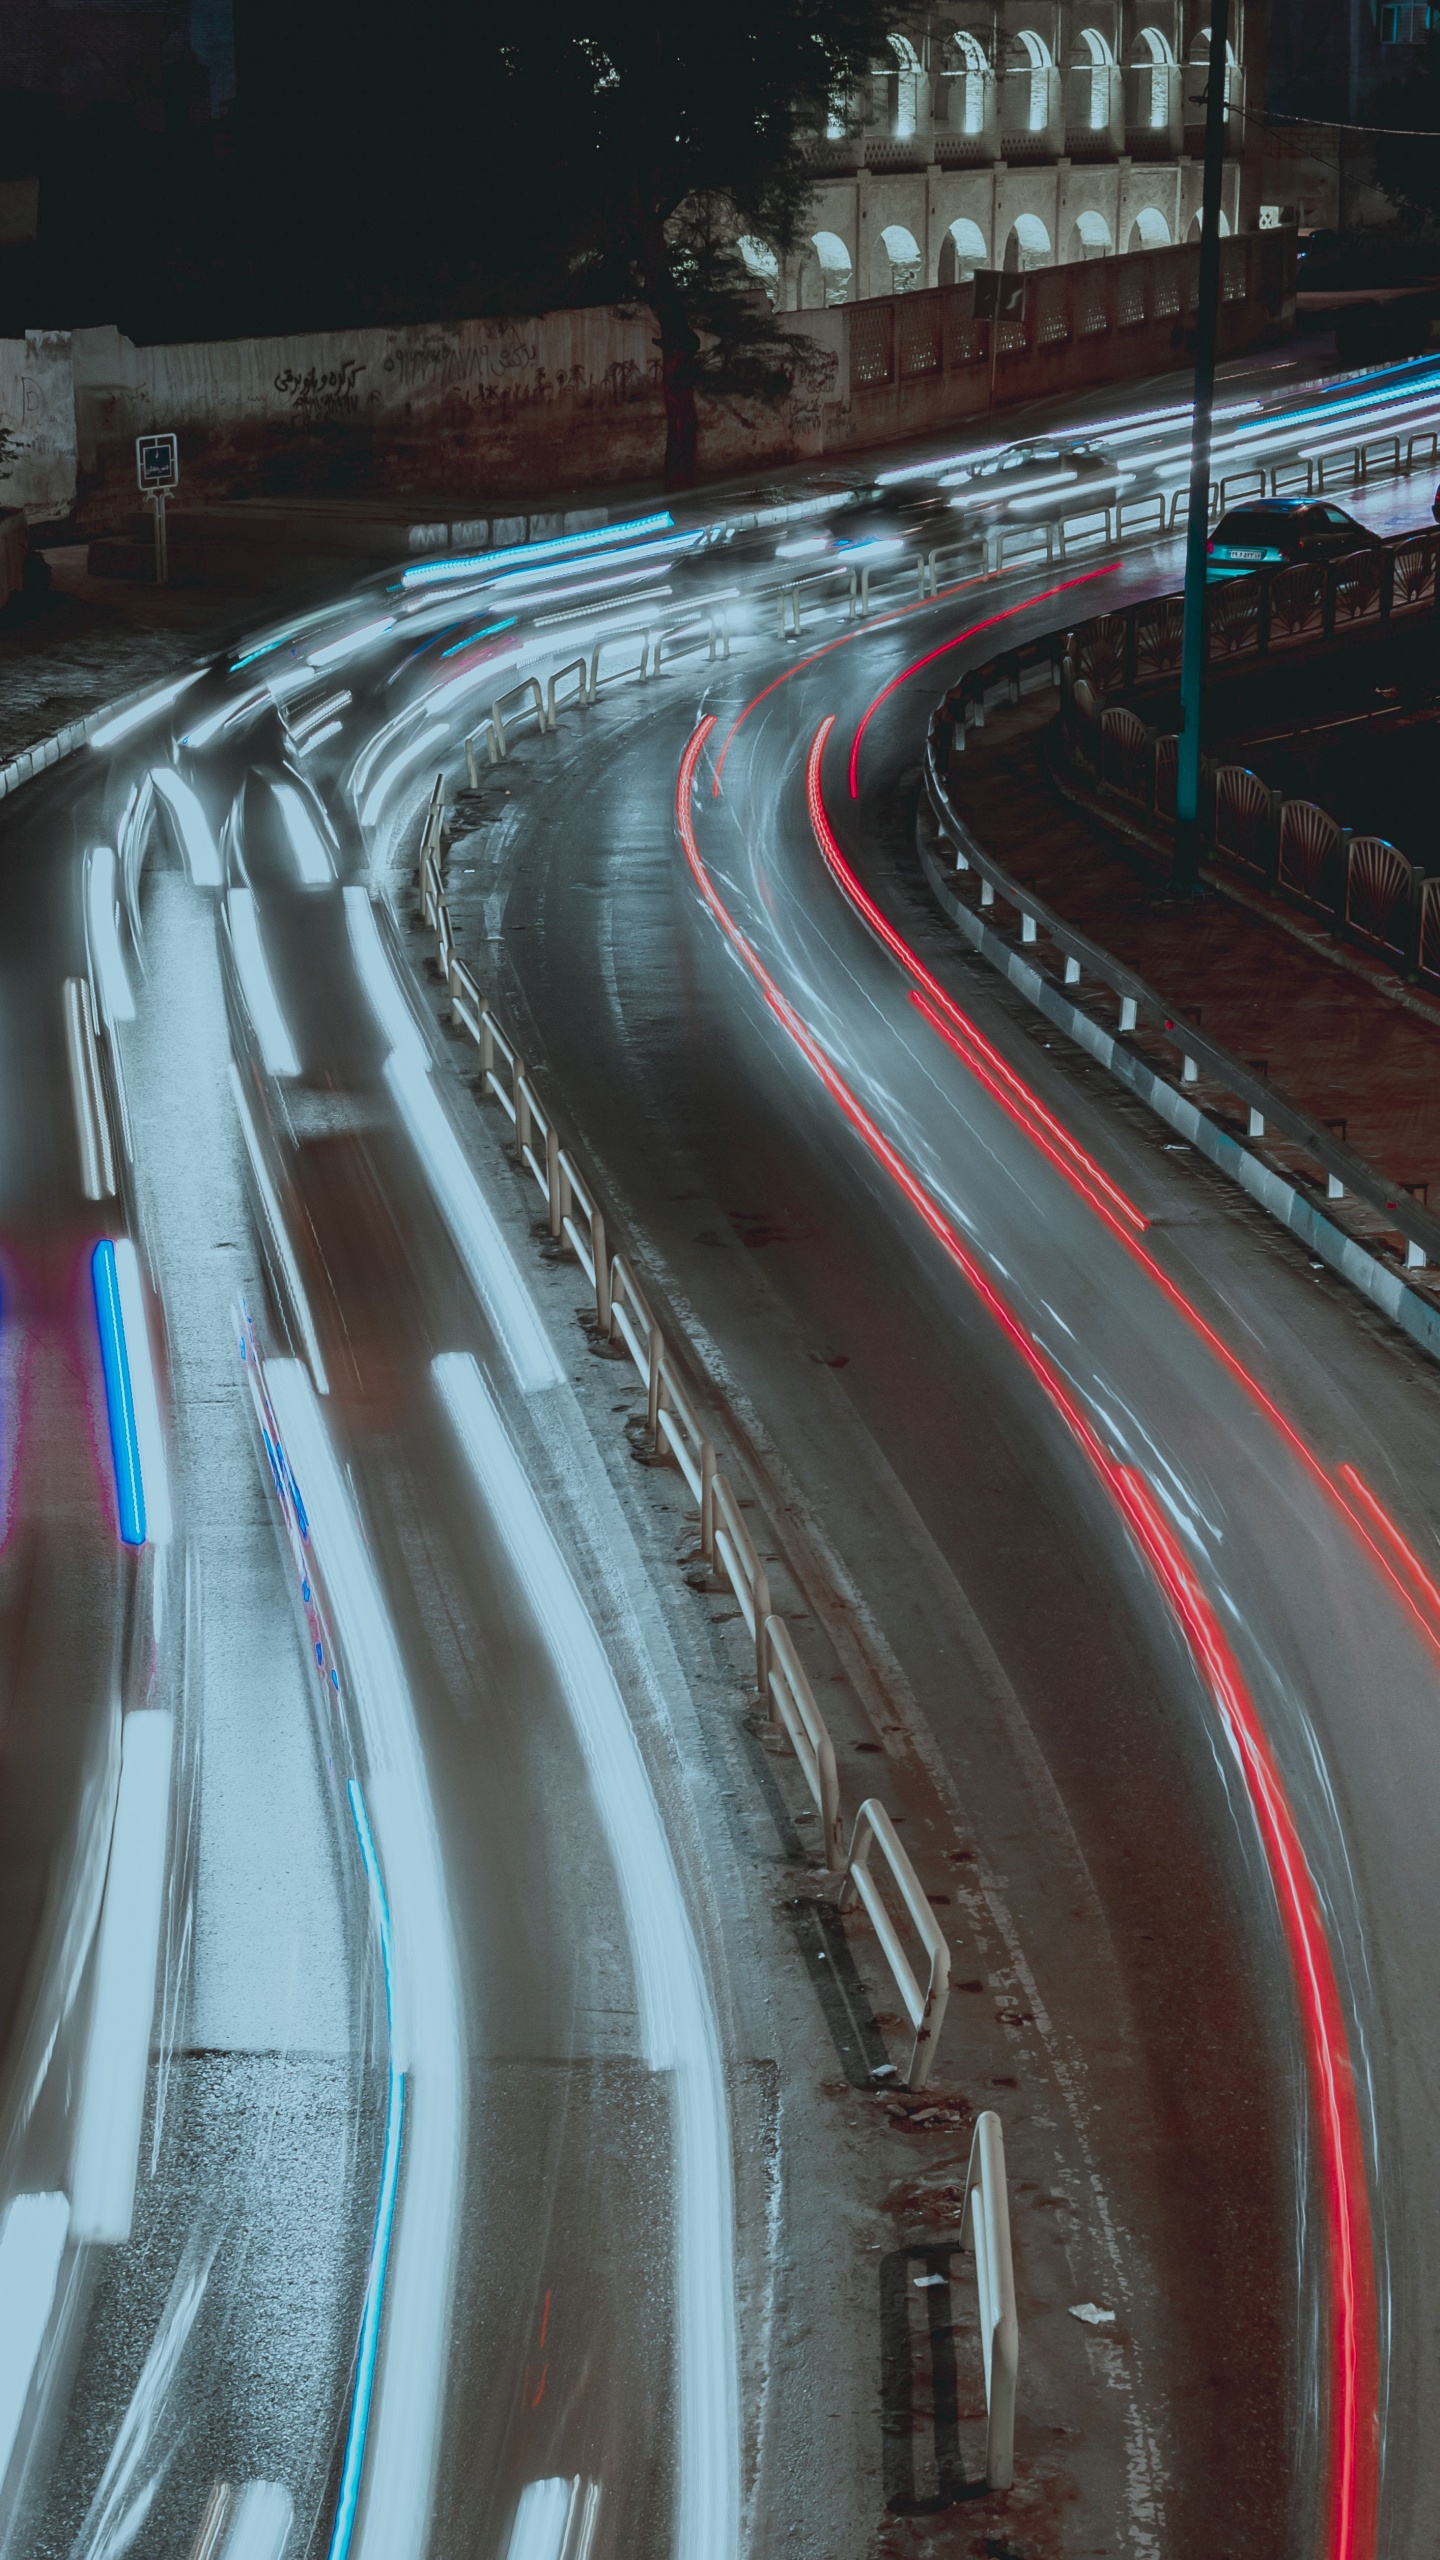 Time Lapse Photography of Cars on Road During Night Time. Wallpaper in 1440x2560 Resolution